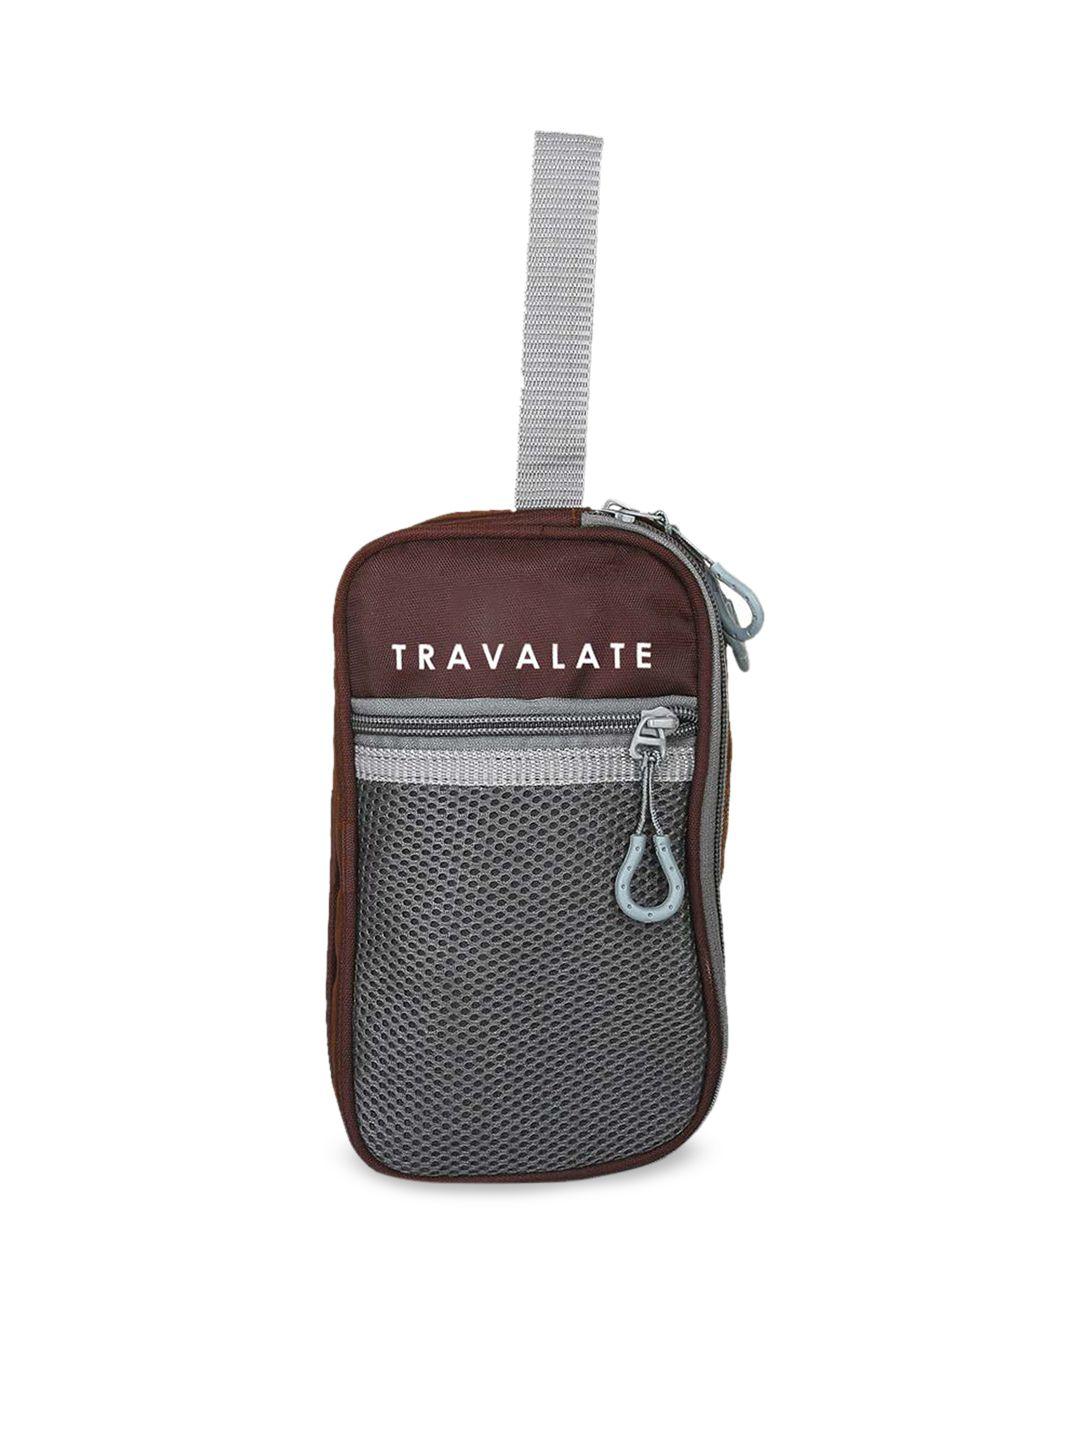 travalate brown solid travel pouch